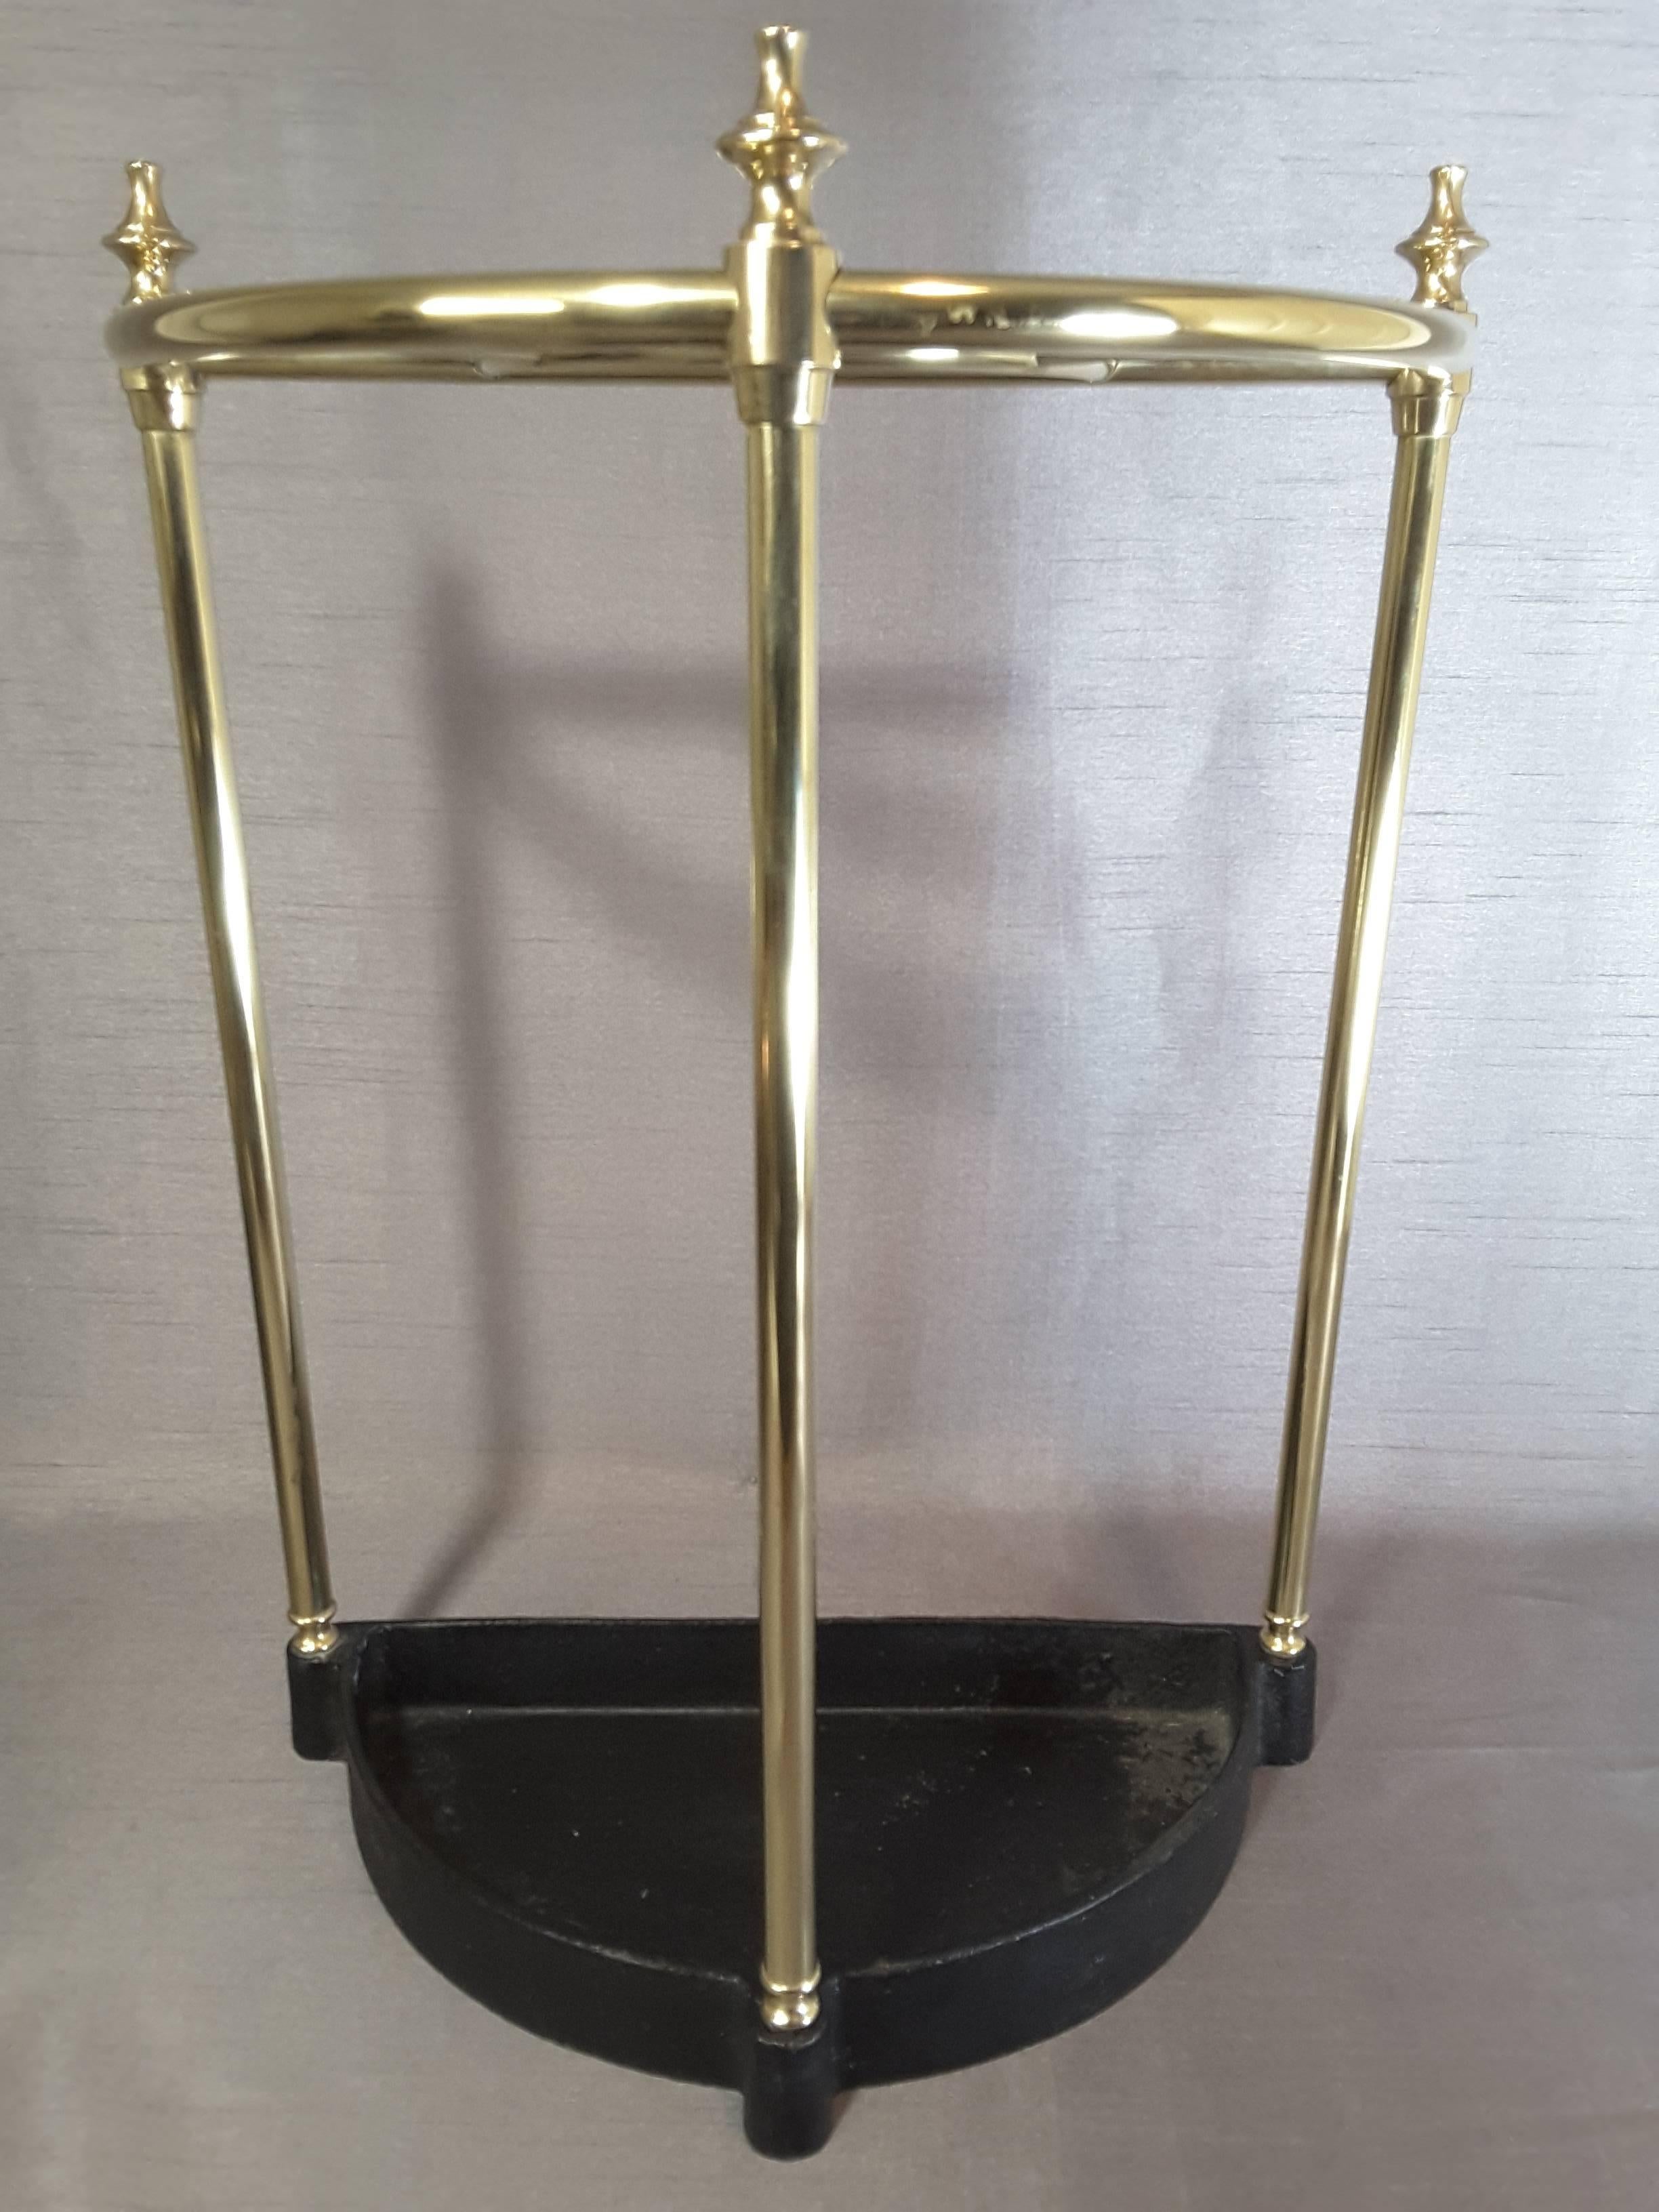 Edwardian brass and cast iron cane & umbrella stand, with a section top for separation of canes and umbrellas. The base is cast iron with a raised edge to catch water dripping. The brass is slightly flared for a visual look, with a turned finial